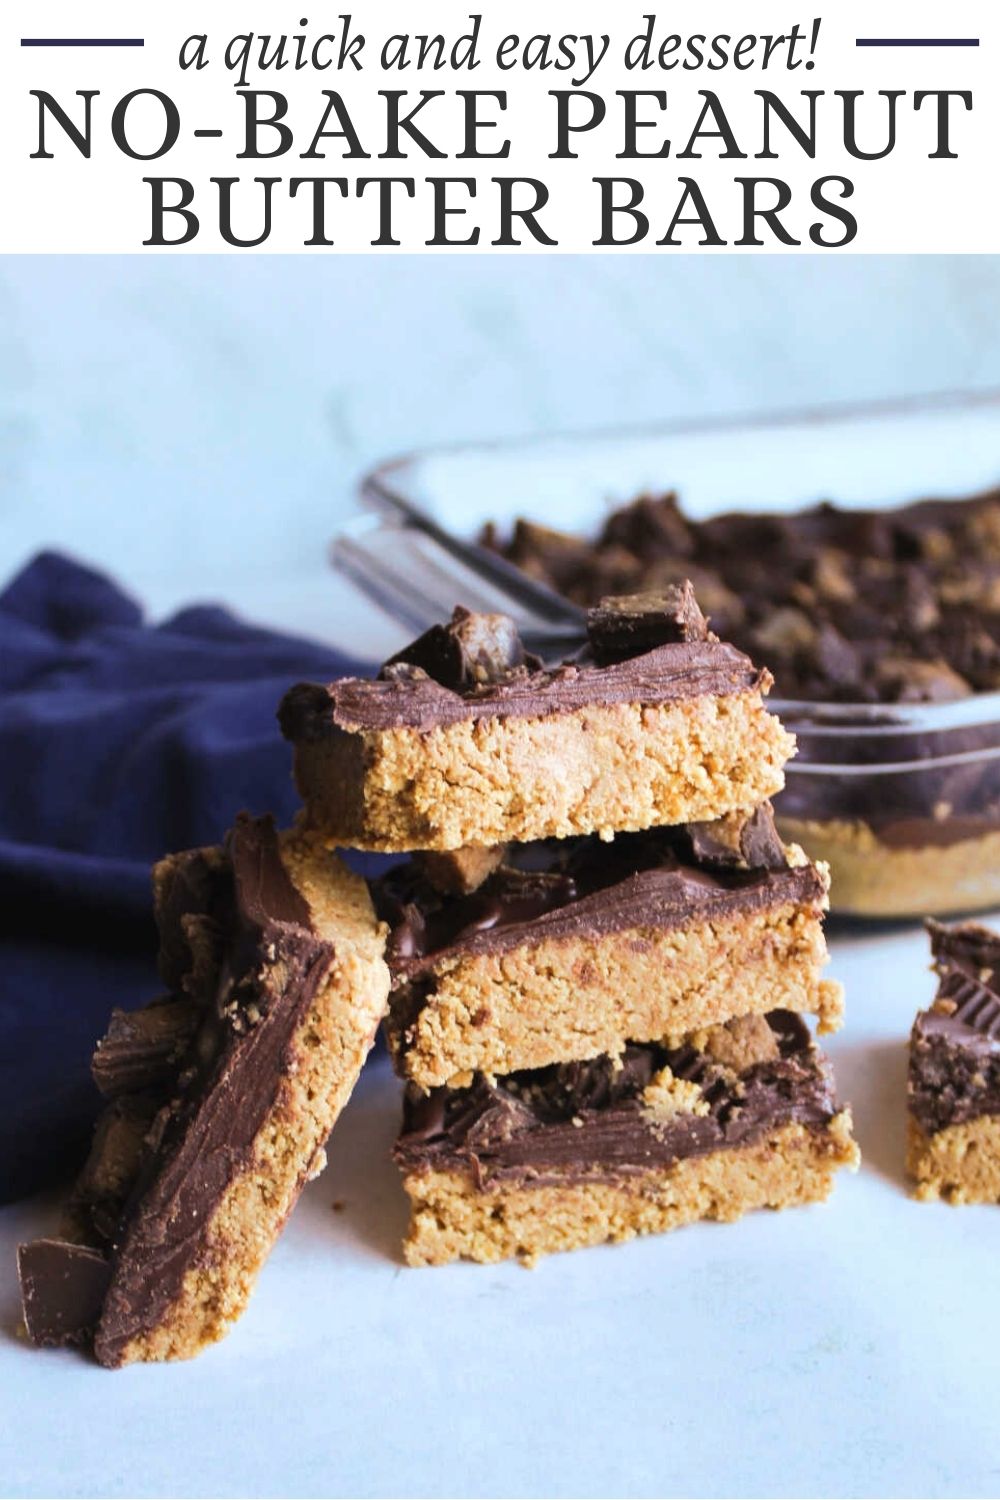 Peanut butter, graham crackers and chocolate come together in these fun no bake peanut butter bars. They are sure to get rave reviews everywhere you take them.  Luckily they only take 6 ingredients and a few minutes to put together, so the are a perfect easy dessert.